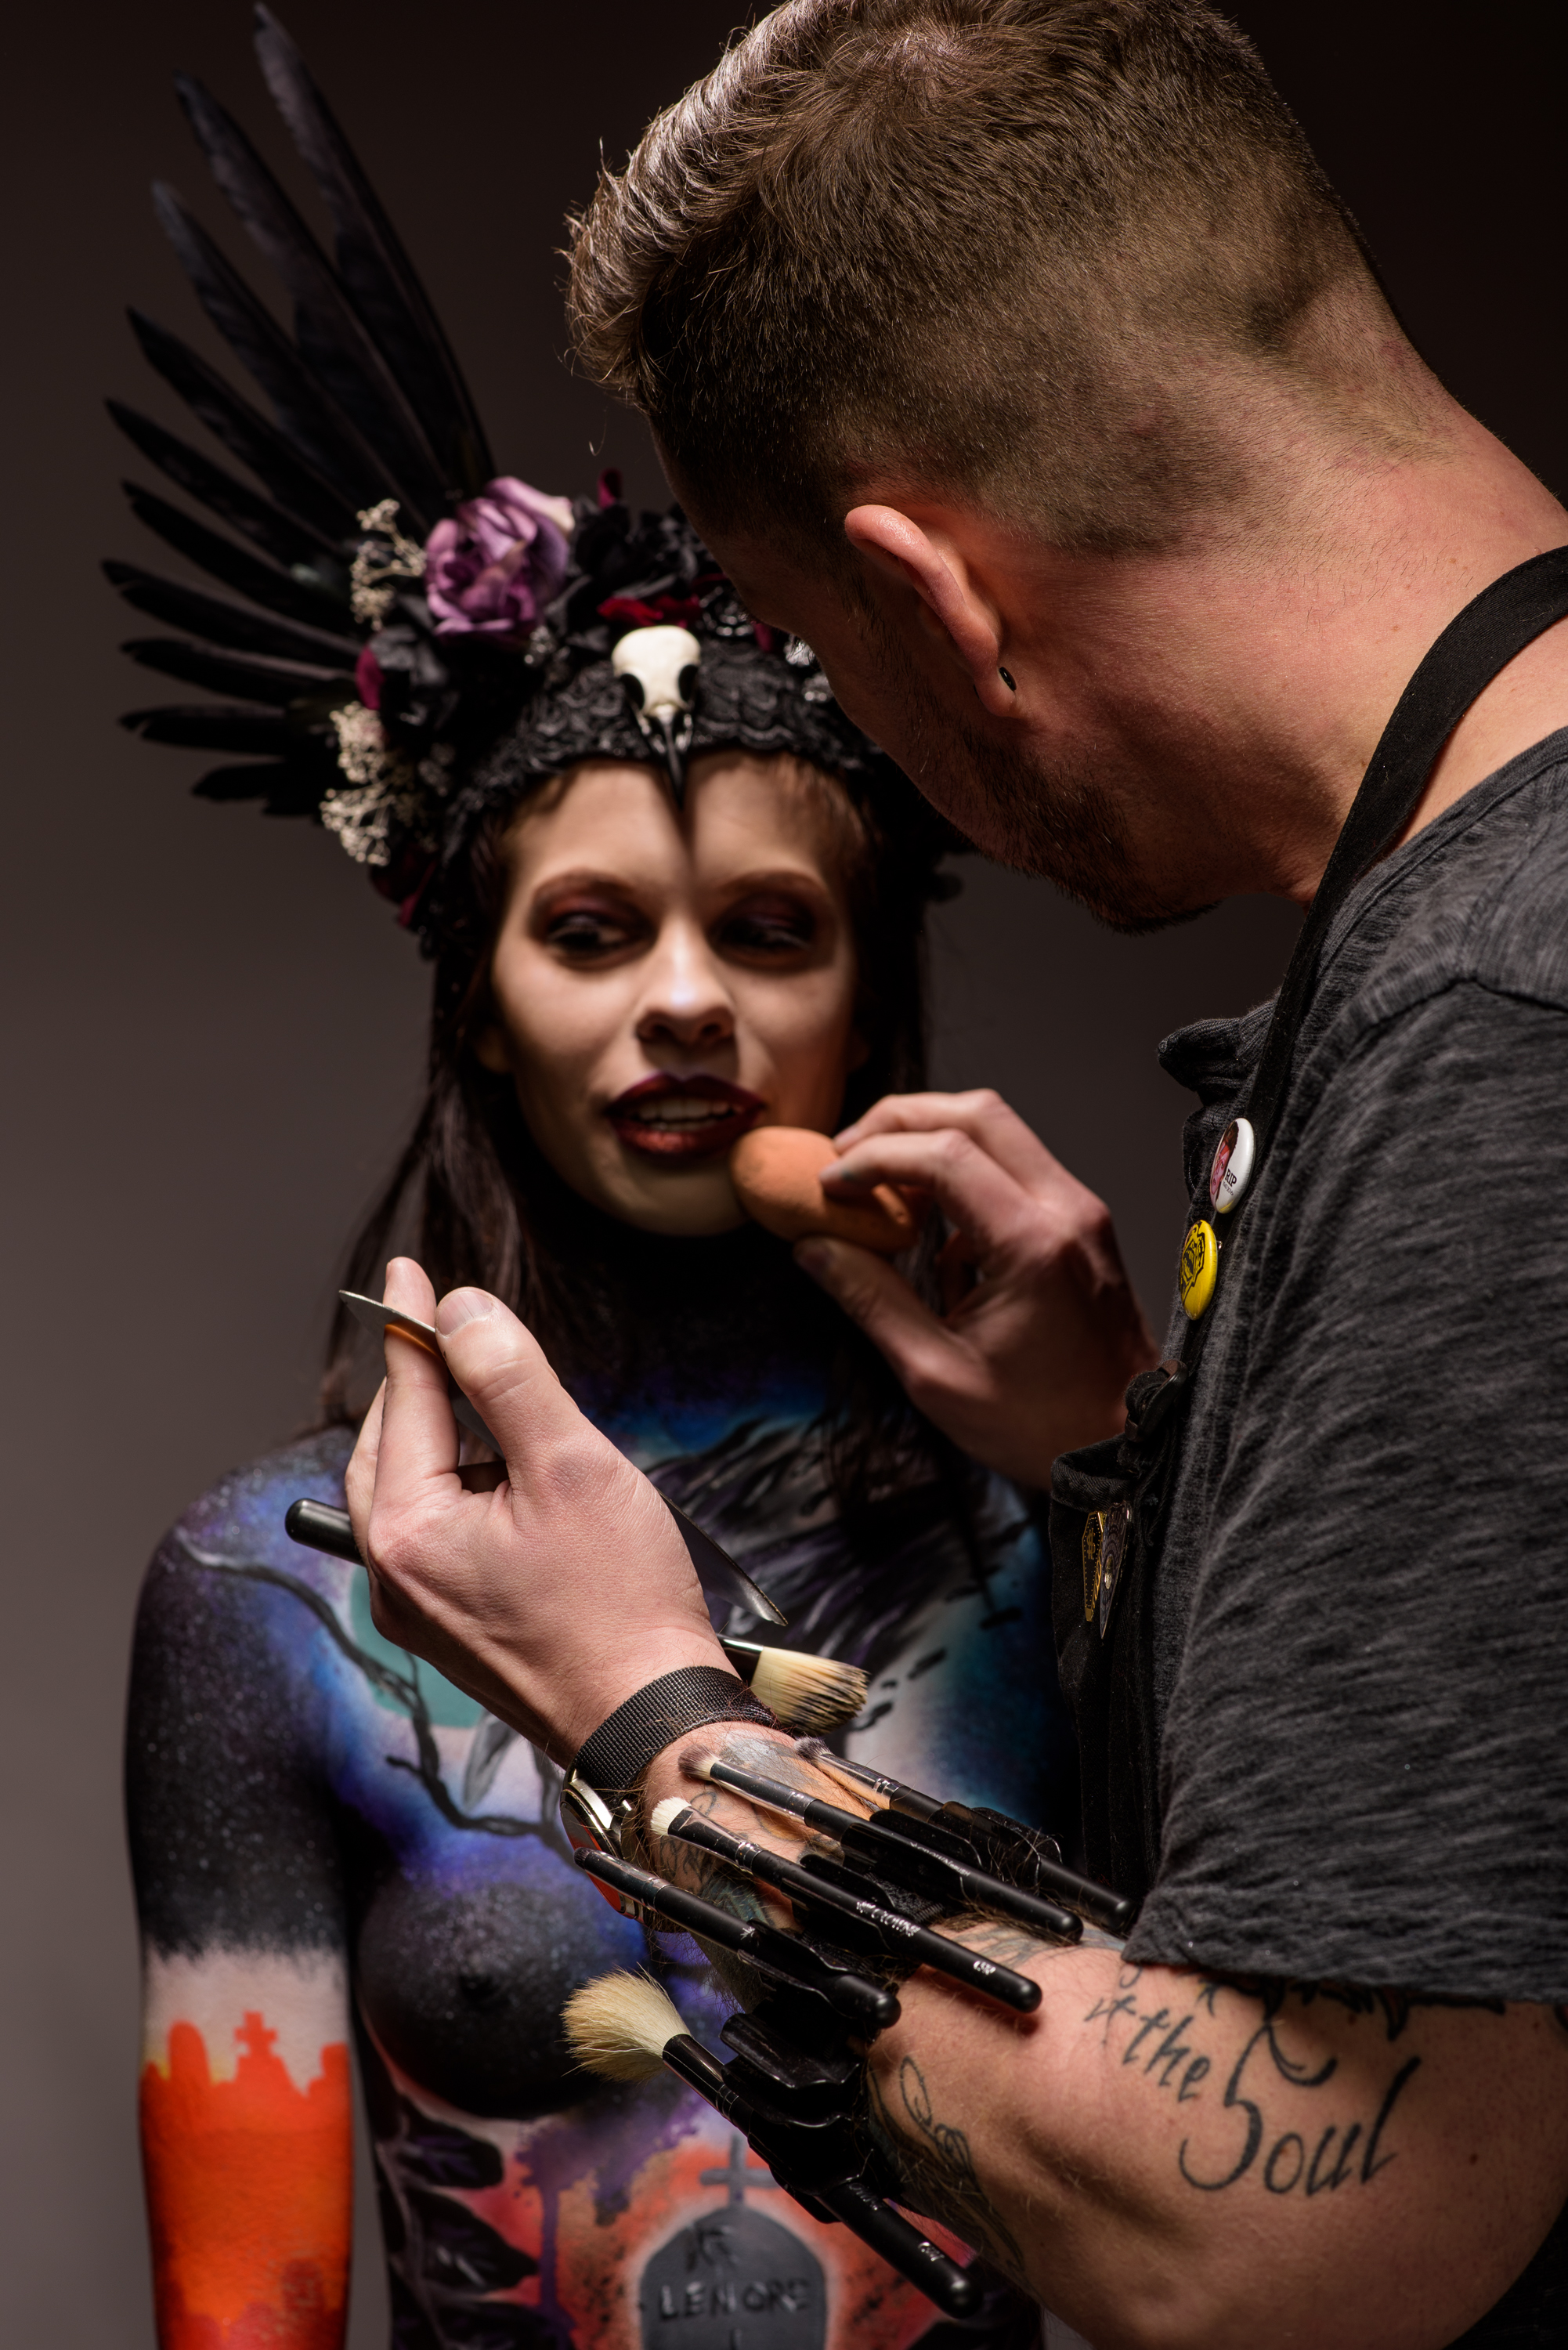  Body Painters who body paint your world, one body painting  at a time! We are bodypainters based in Los Angeles and are available to body  paint world-wide!